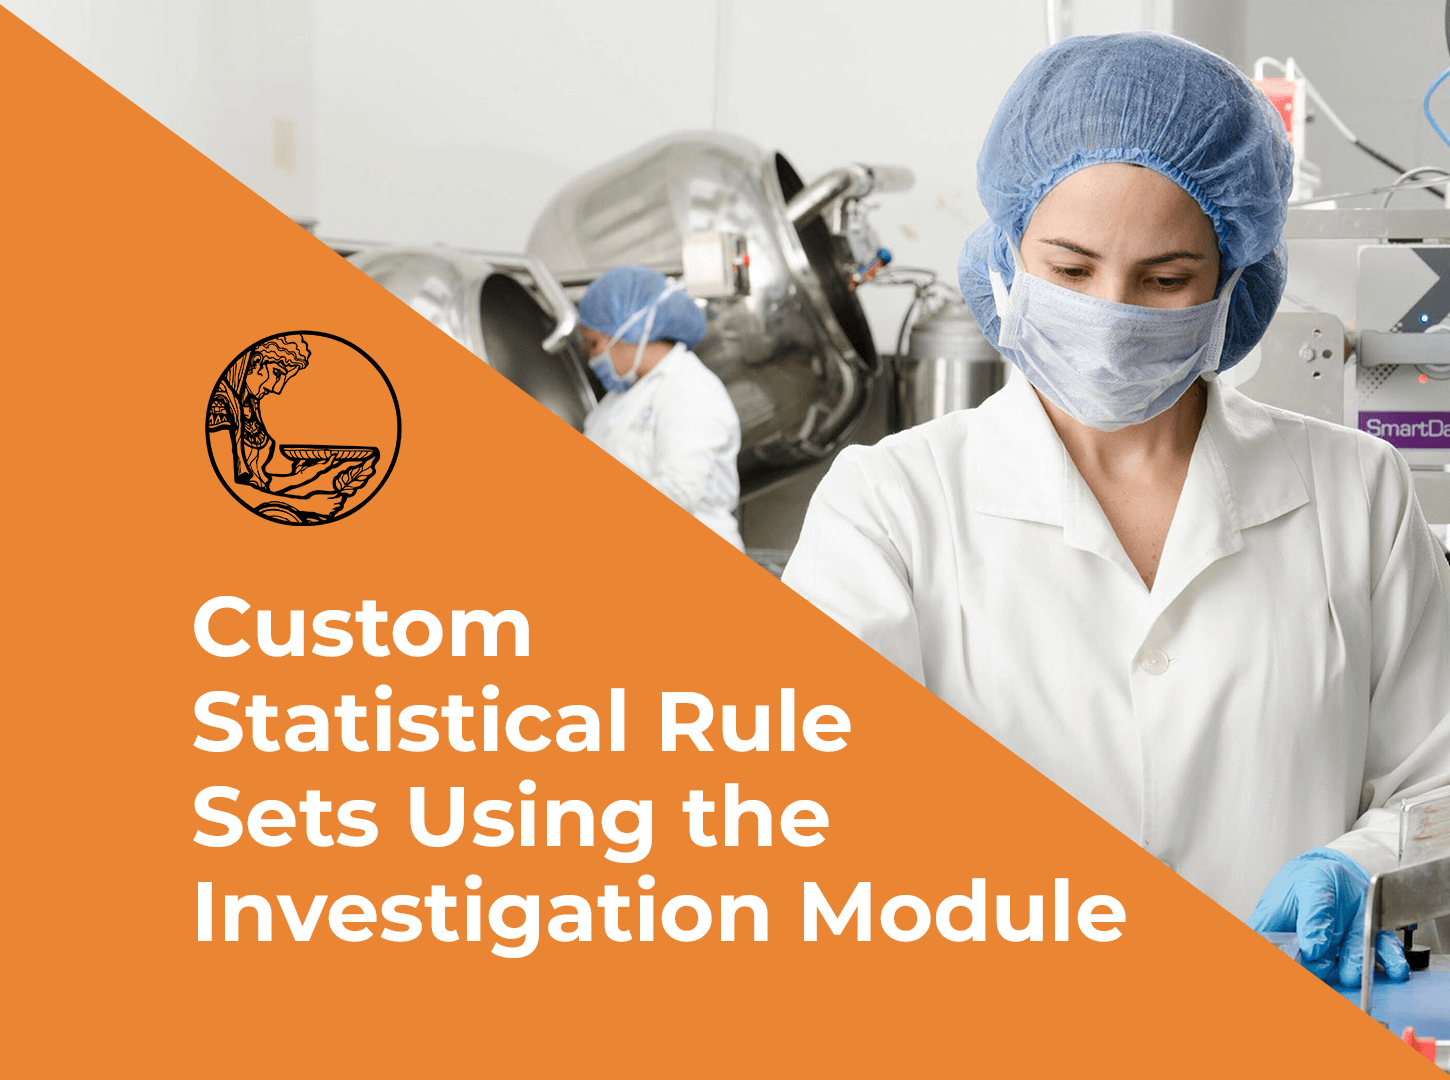 Featured image for “Custom Statistical Rule Sets Using the Investigation Module”